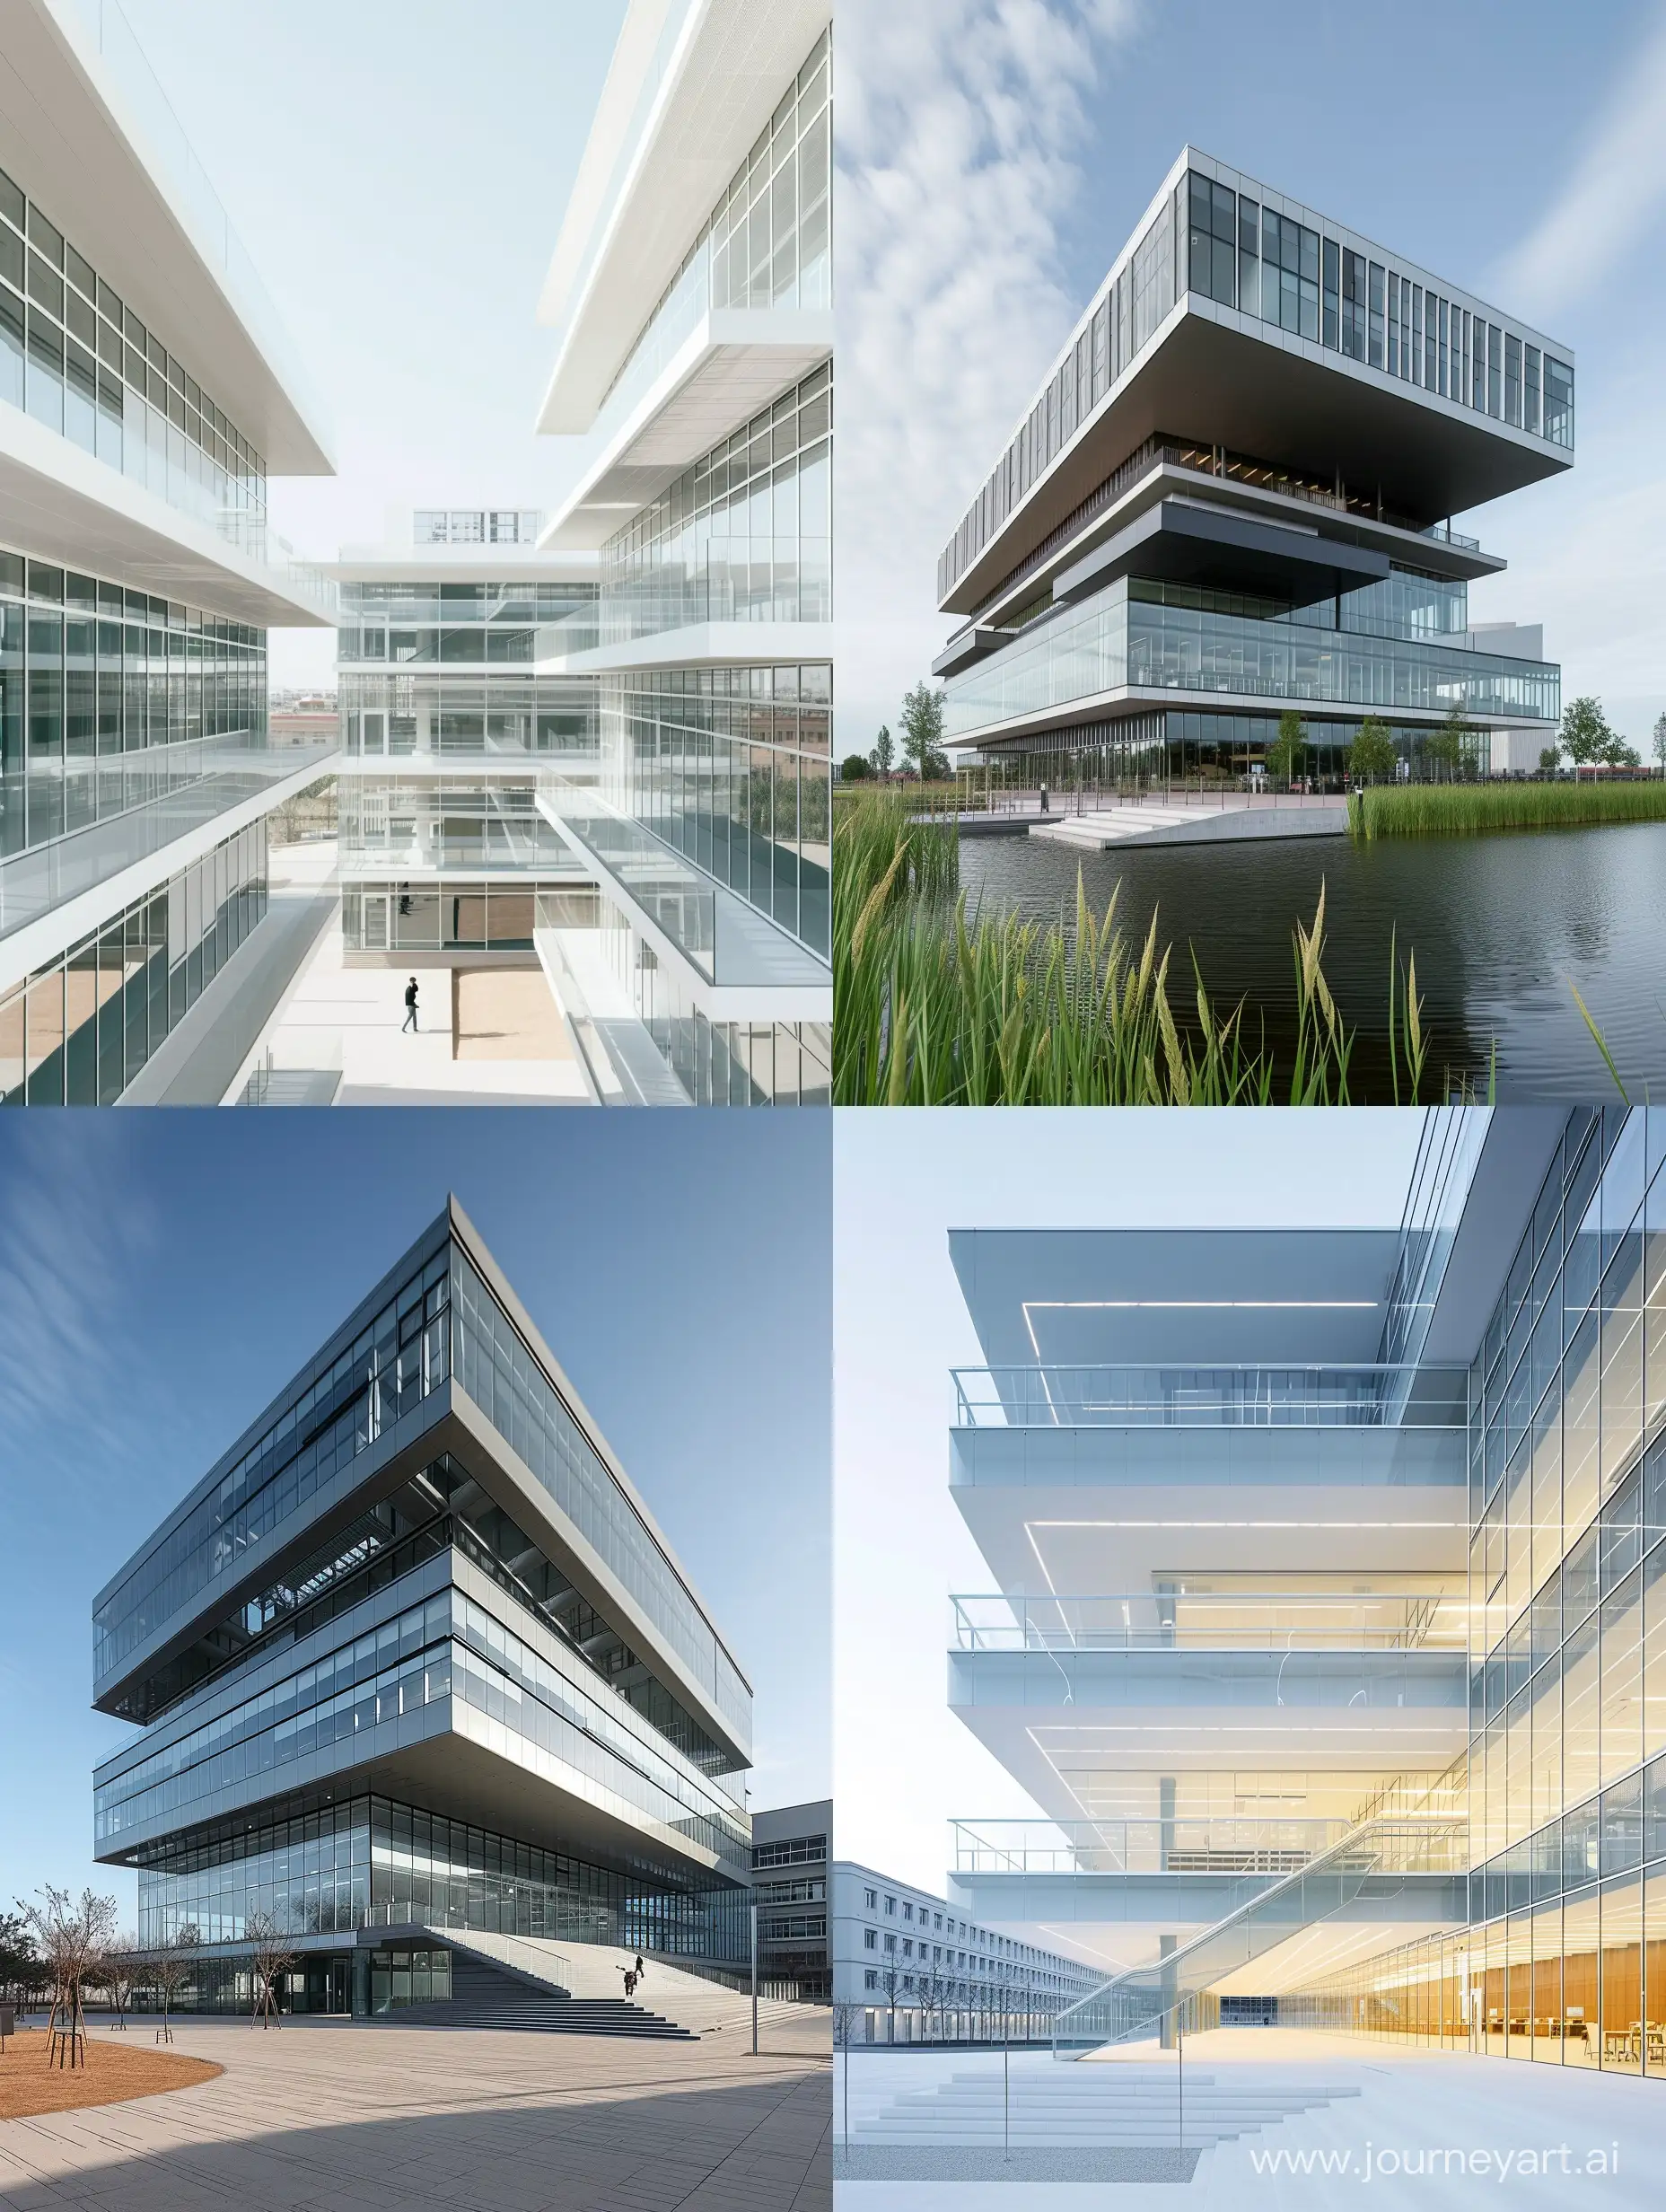 /imagine a instutucional building contest architecture, 8 floors,exterior,perspective,Photographed by Iwan Baan,clean lines, open spaces, and the use of glass and steel.